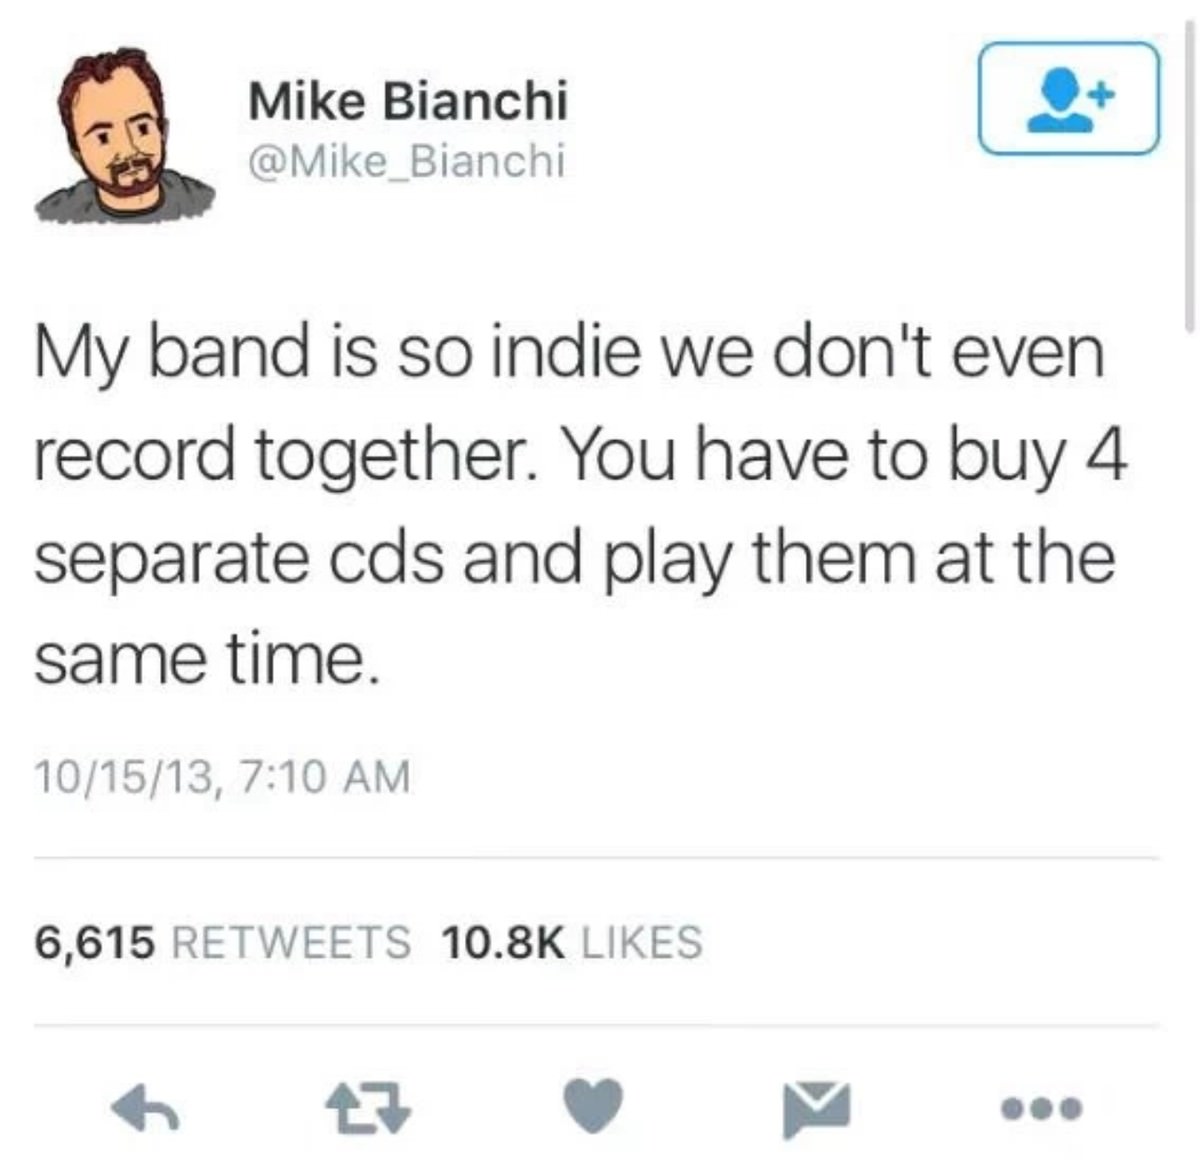 my band is so indie meme - Mike Bianchi My band is so indie we don't even record together. You have to buy 4 separate cds and play them at the same time. 101513, 6,615